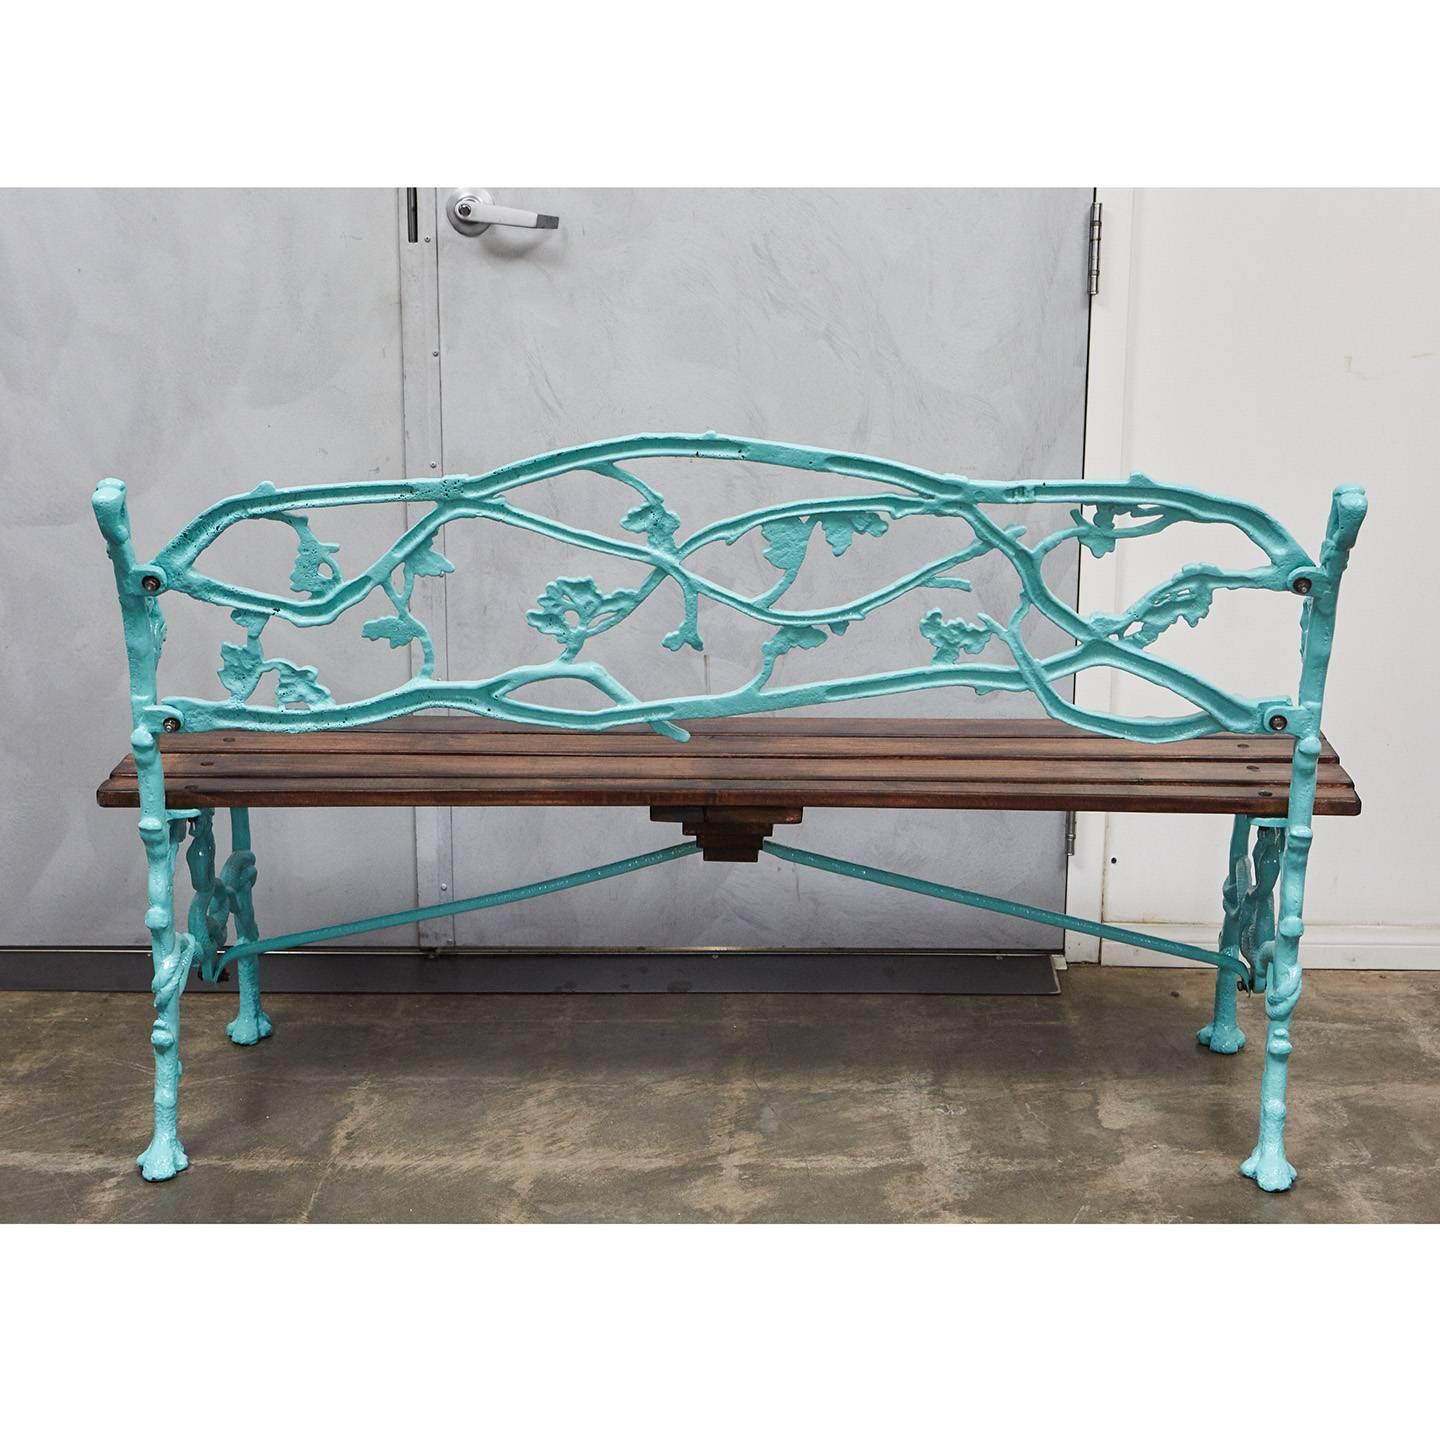 This English Victorian garden bench has been styled and re-furbished for a second life. The iron base has incredible decorative elements of oak branches, leaves and acorns with entwining serpents creating the lower legs and stretchers. The base has